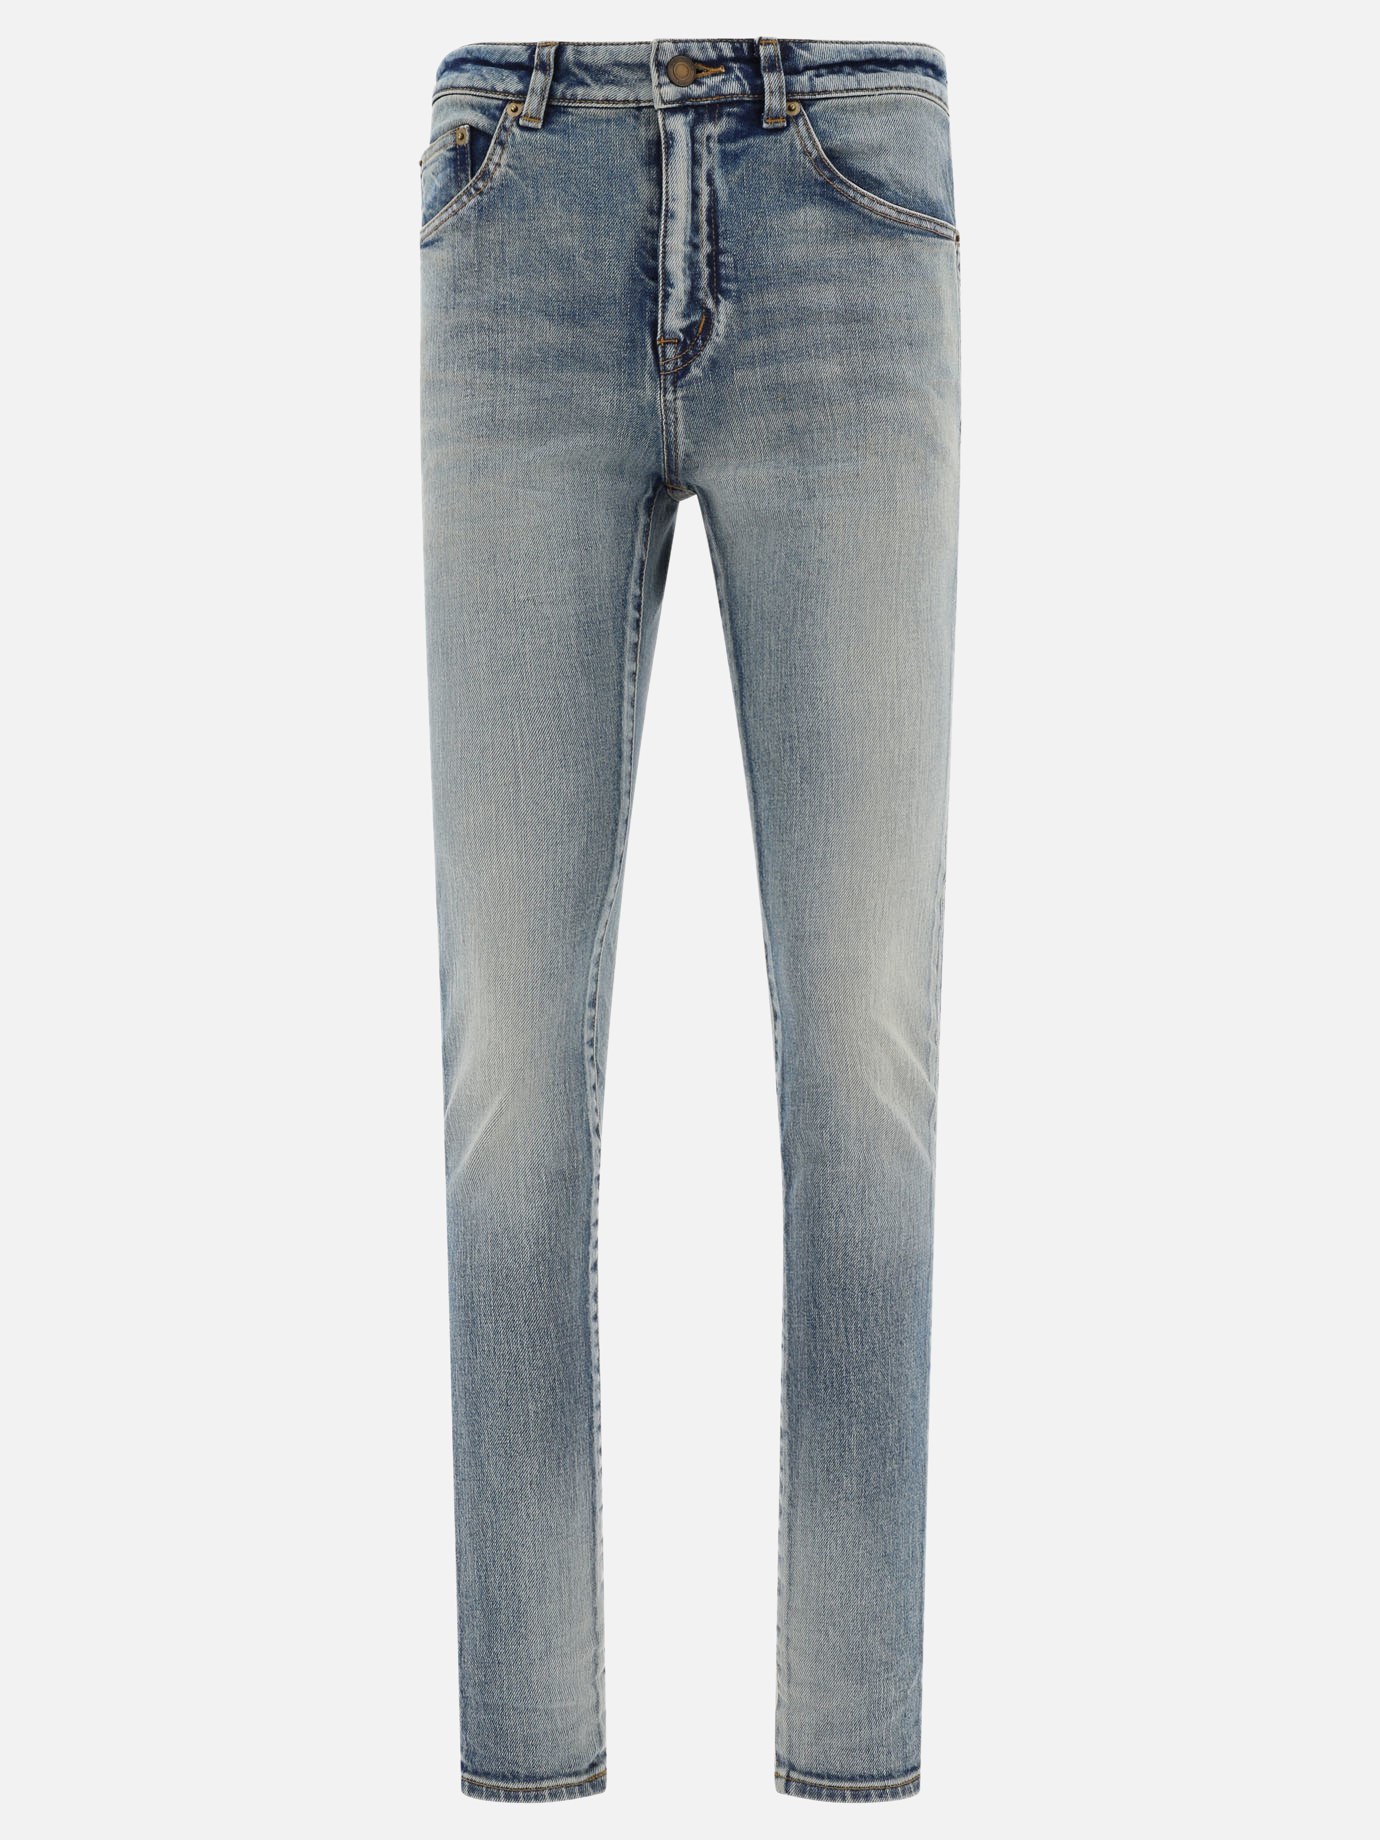 Washed out jeansby Saint Laurent - 5